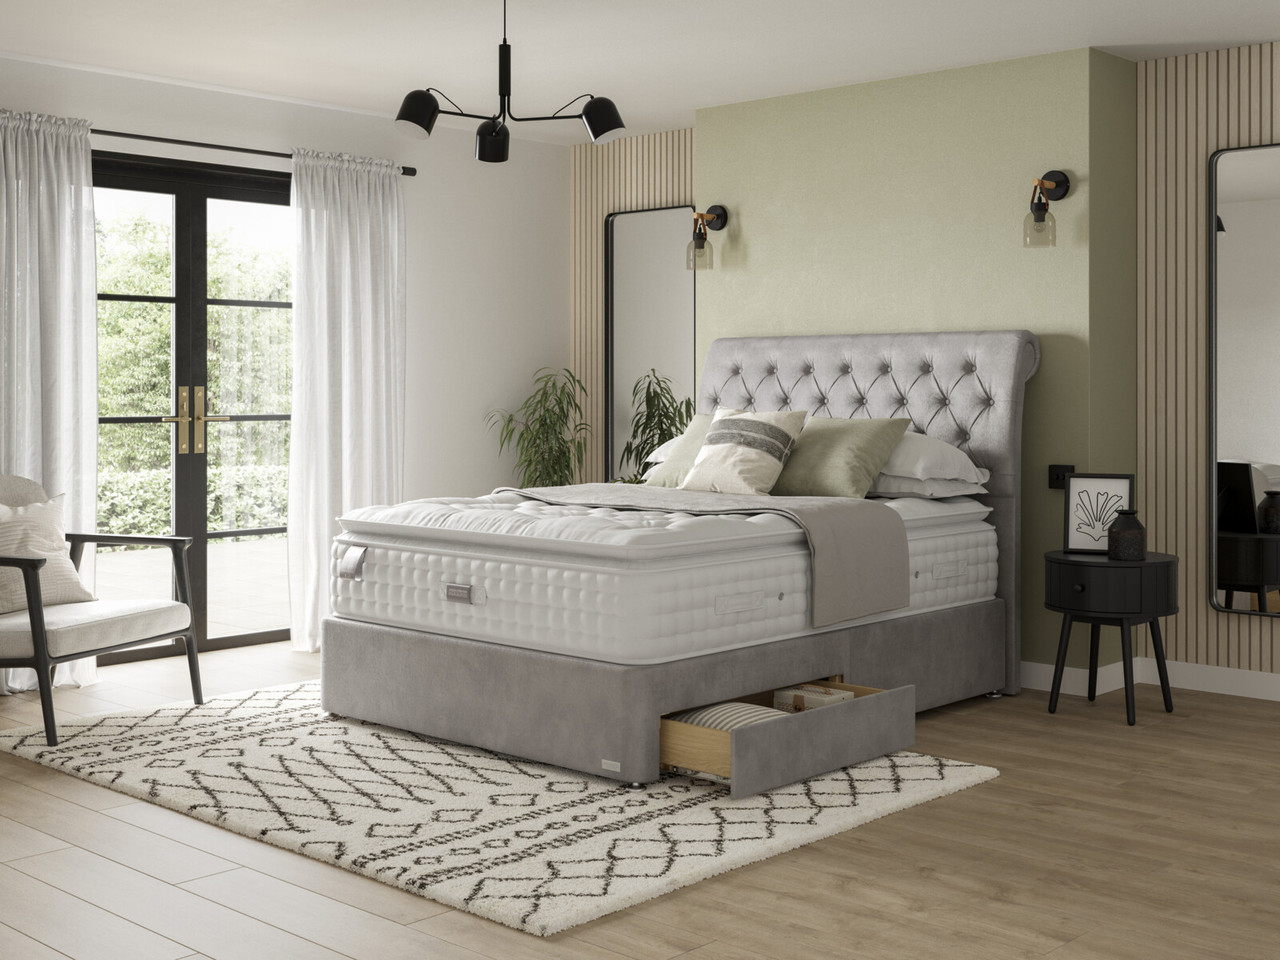 Staples And Co Artisan Deluxe Divan Bed Set On Glides King London Tan